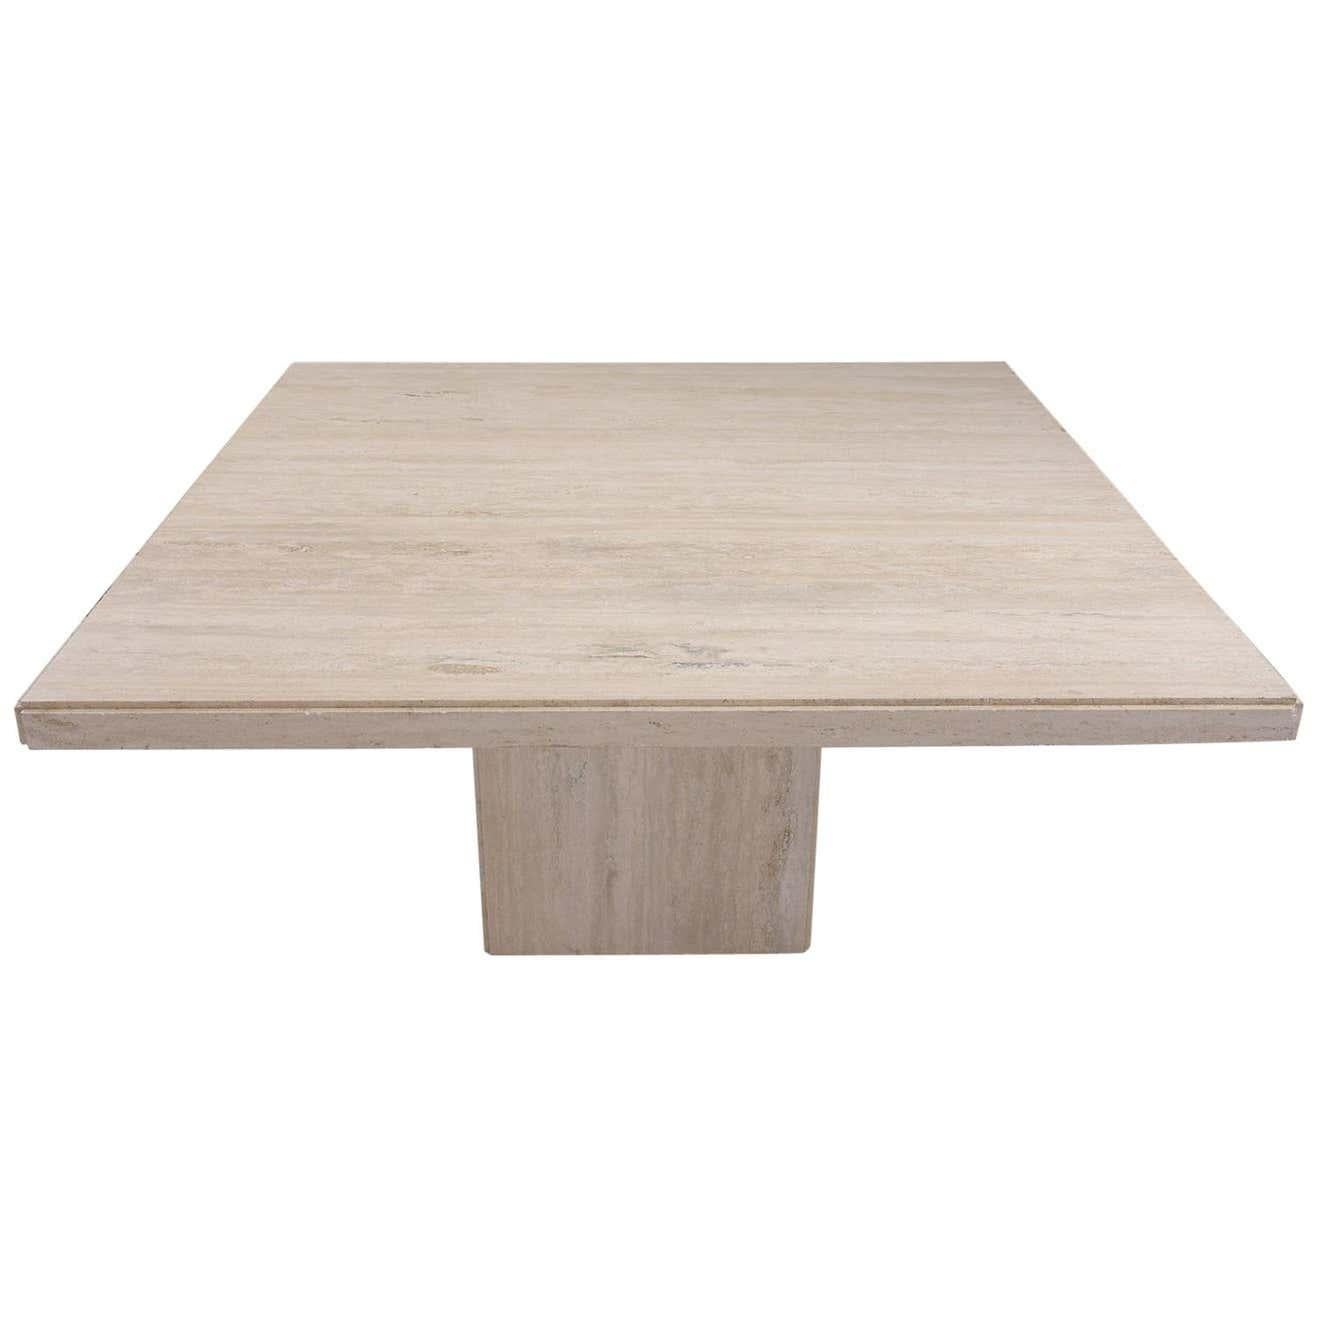 Experience the splendor of our extraordinary 1970s Italian travertine dining table, meticulously handcrafted out of top-quality travertine marble. Newly restored, this piece boasts a large, captivating square top with sophisticated rounded edges,